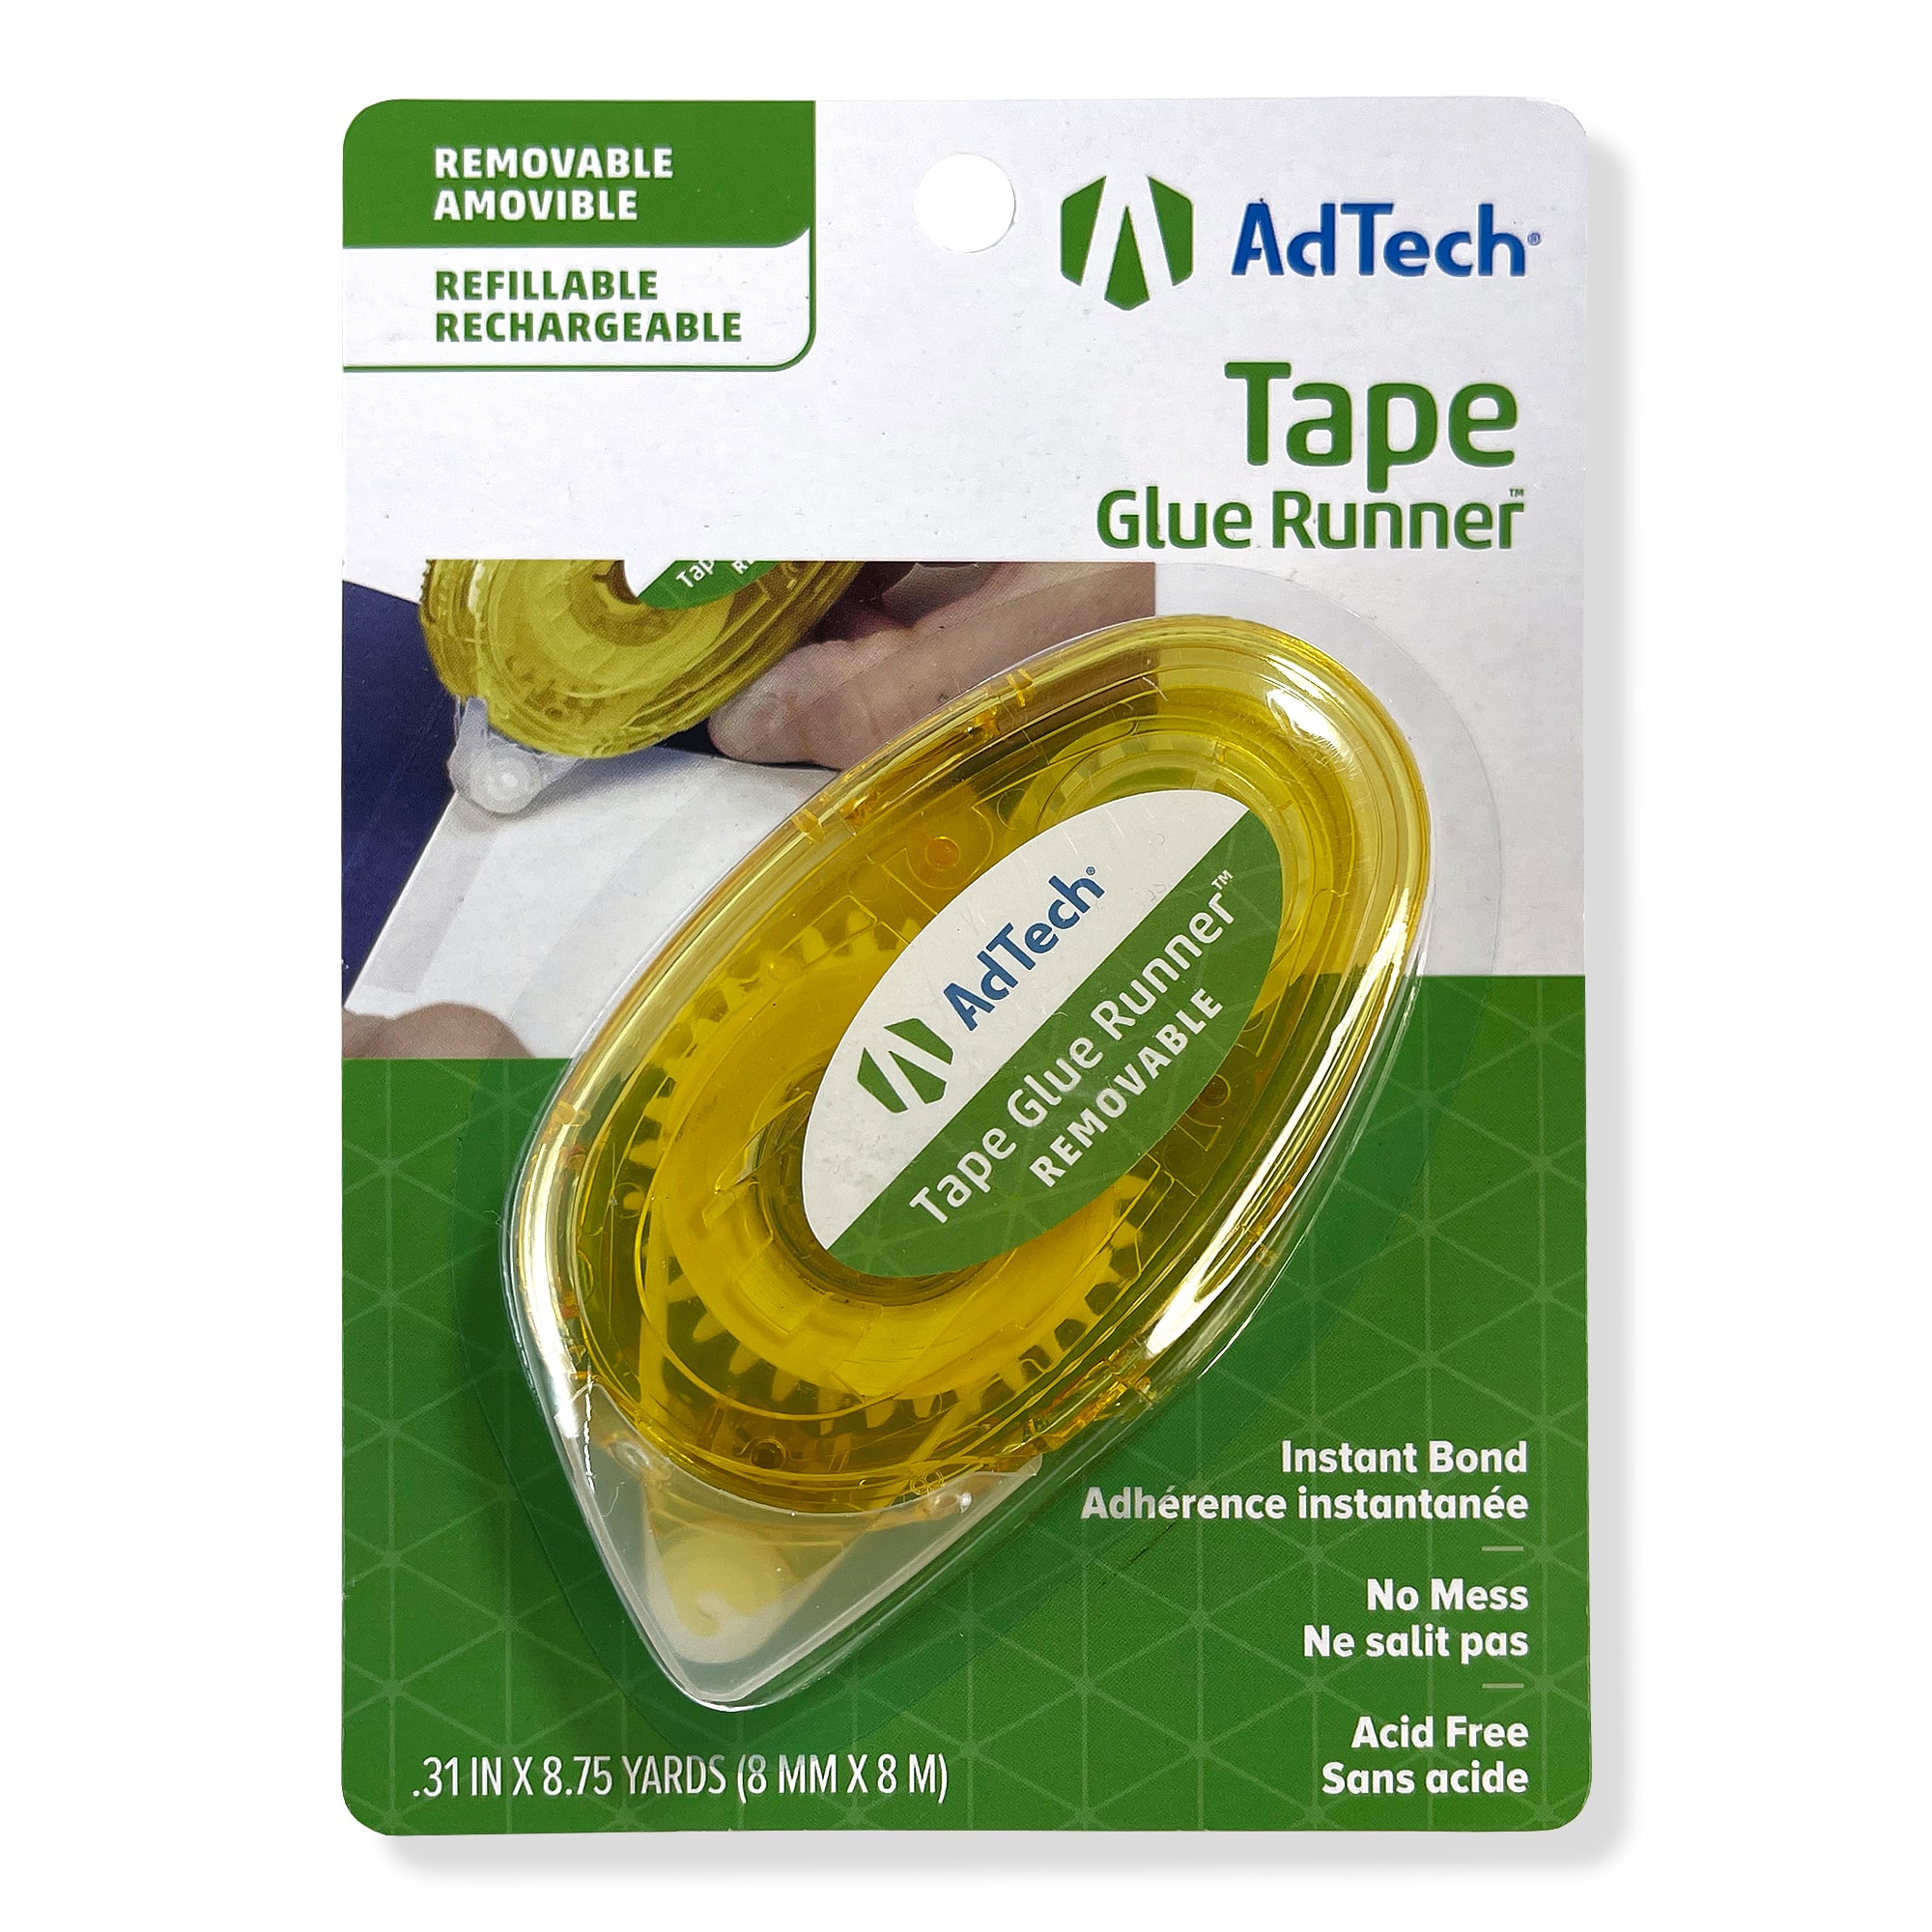 Find the Ad tech™ Crafter's Tape™ Refills Value 8 Pack at Michaels